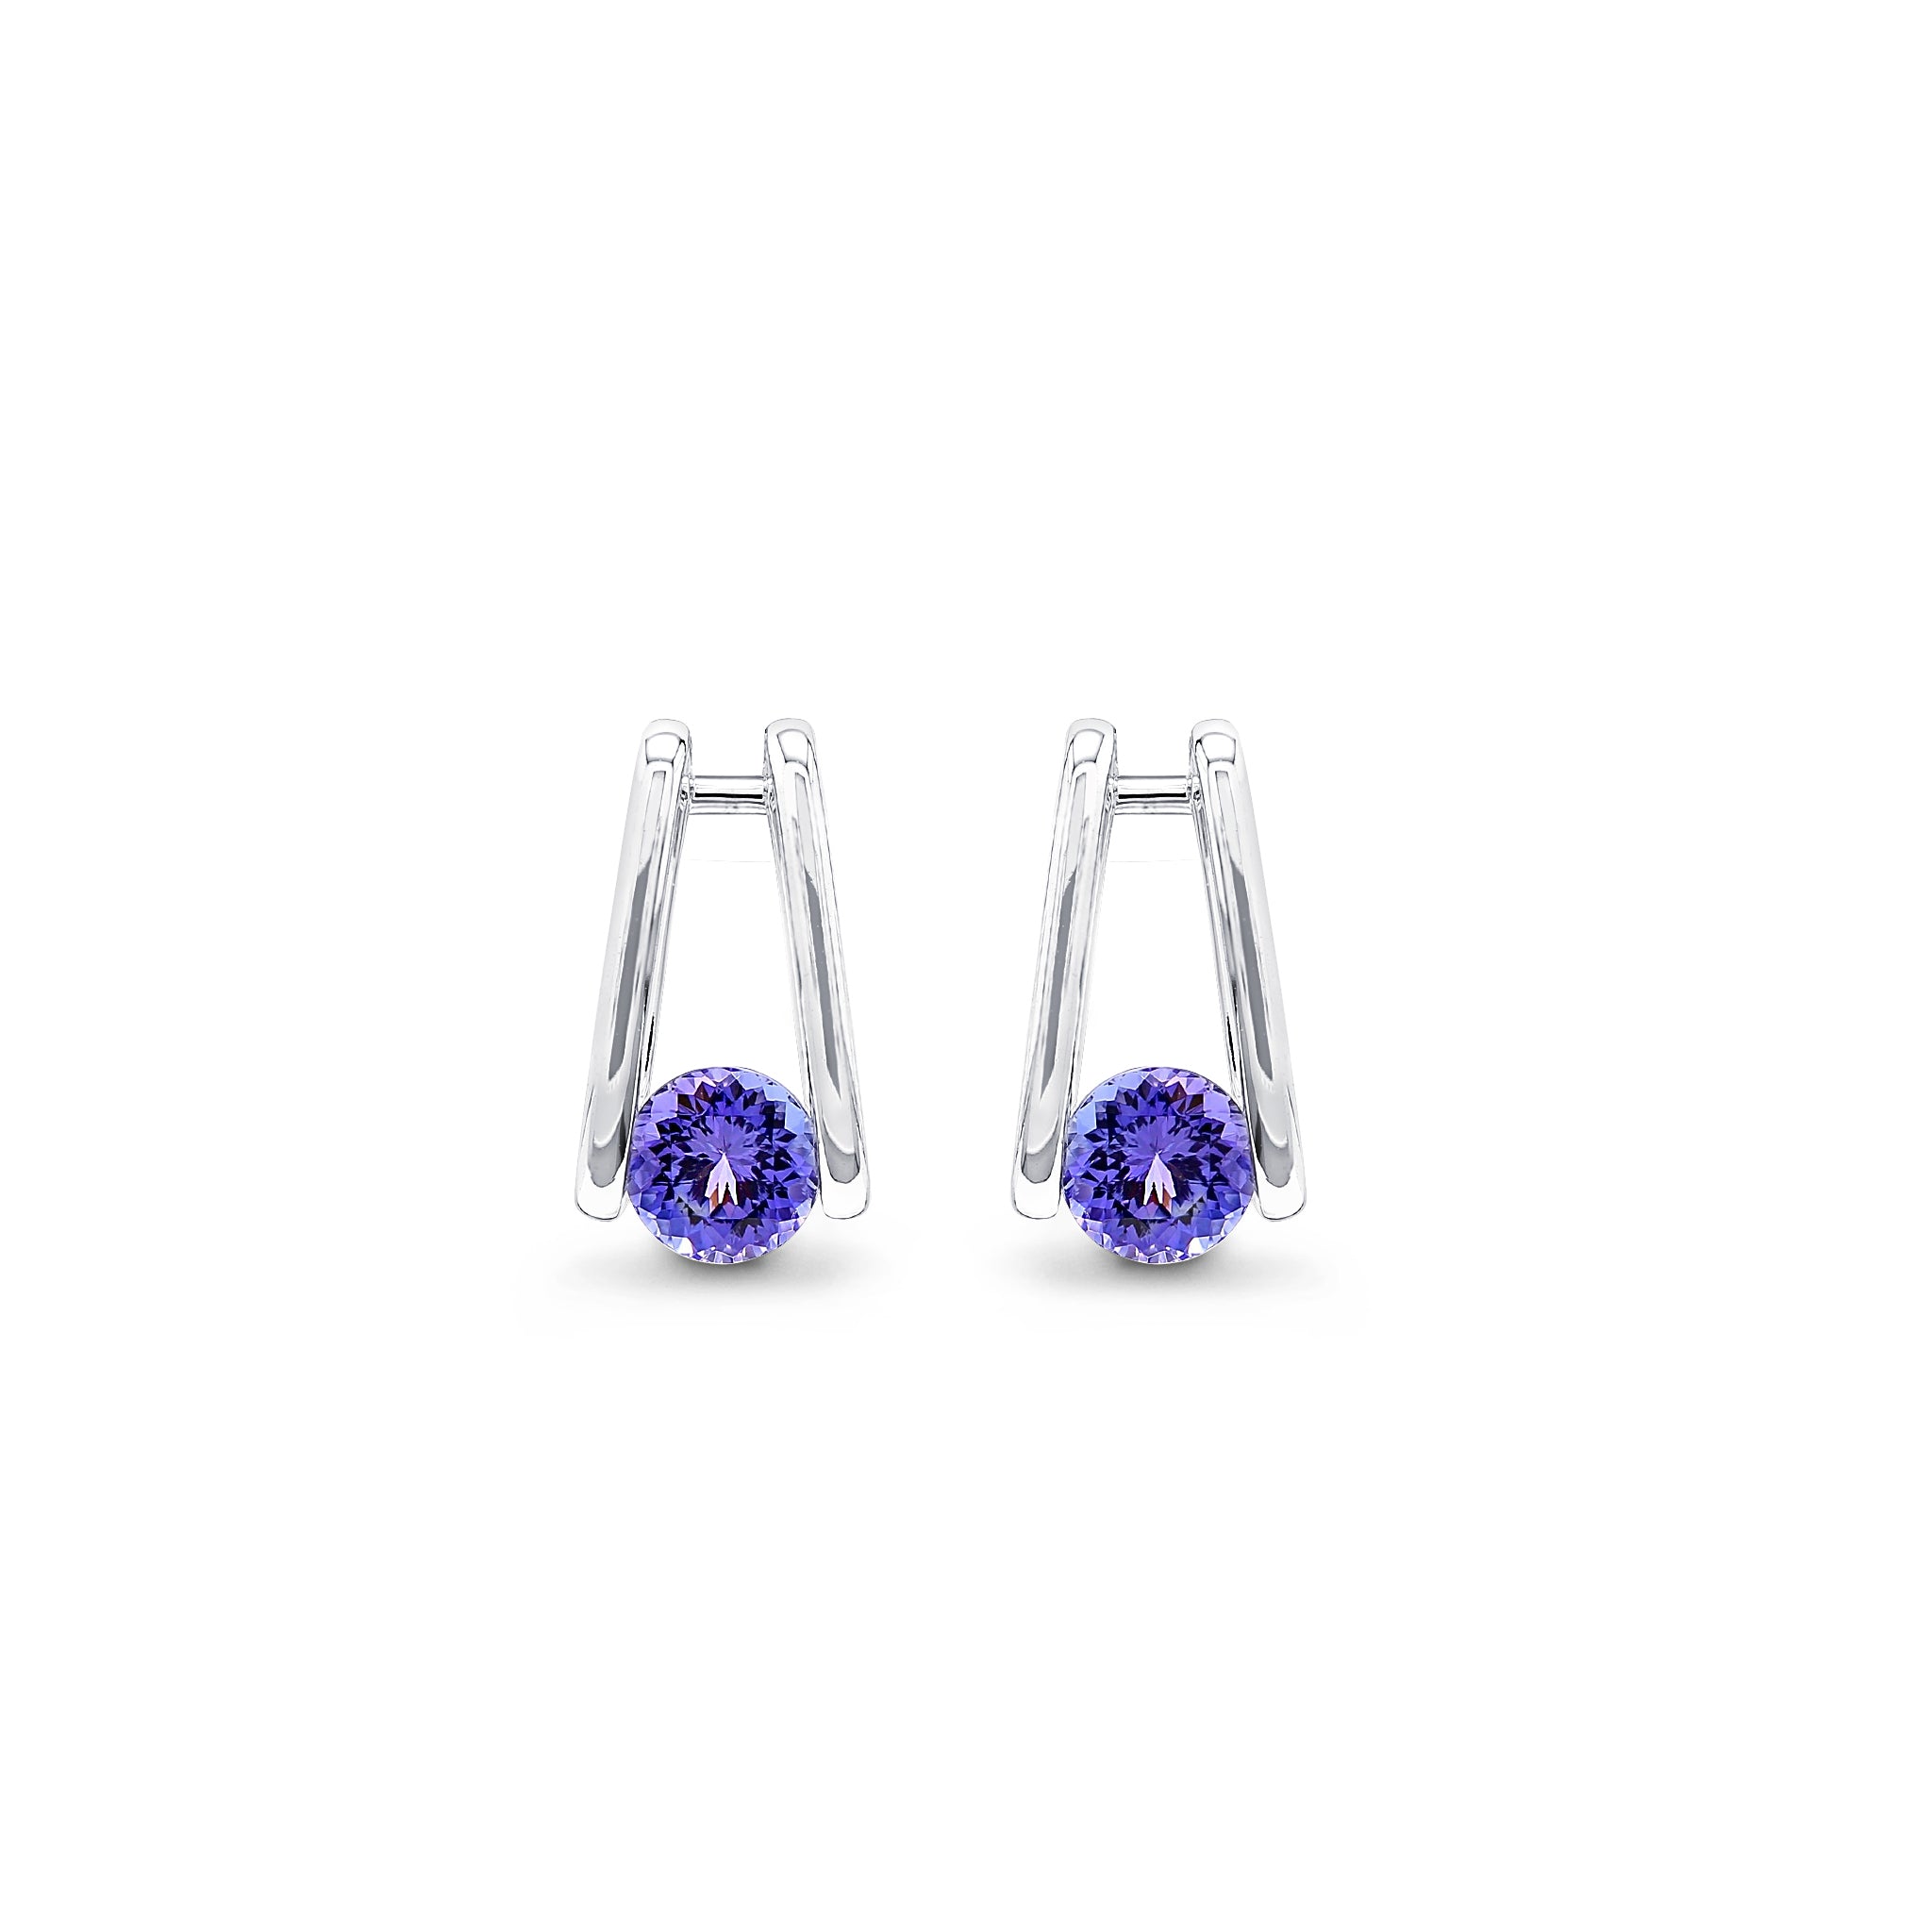 Millennium Classic Tanzanite Stud Earrings 1.10 Carat in 14K White Gold Front View